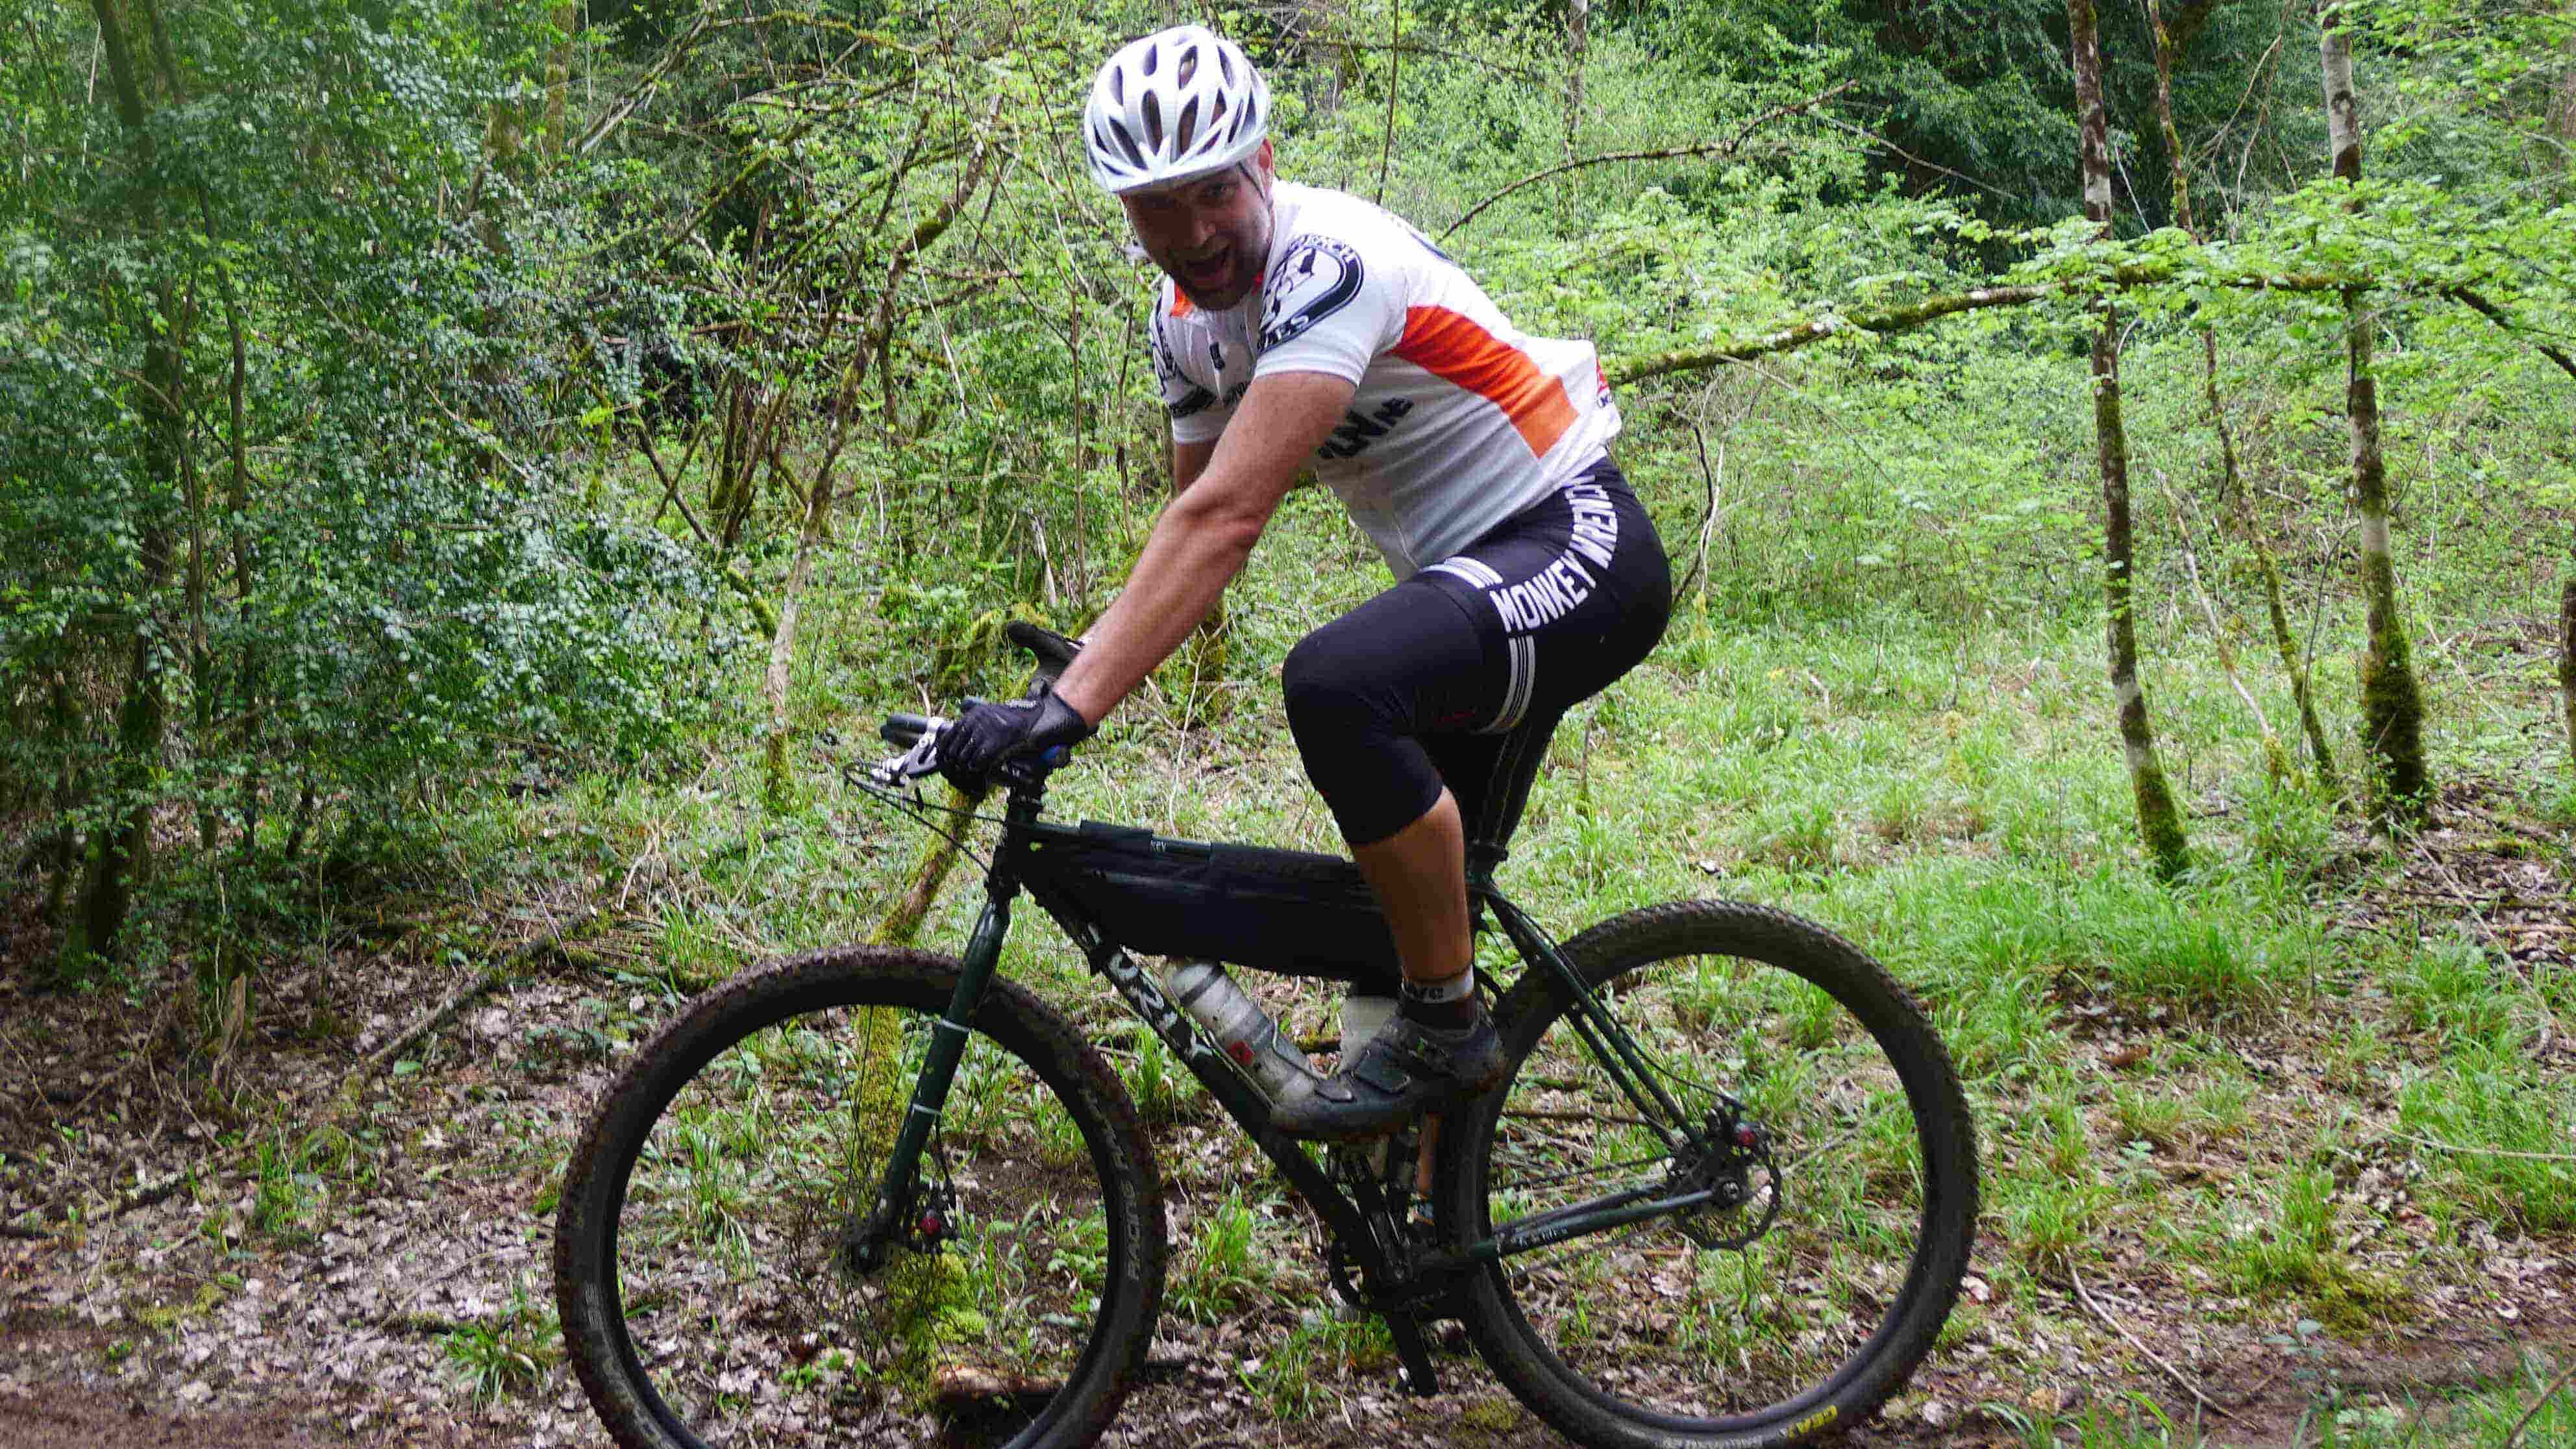 Right side view of a cyclist, riding a black Surly Karate Monkey bike, on a trail in the woods